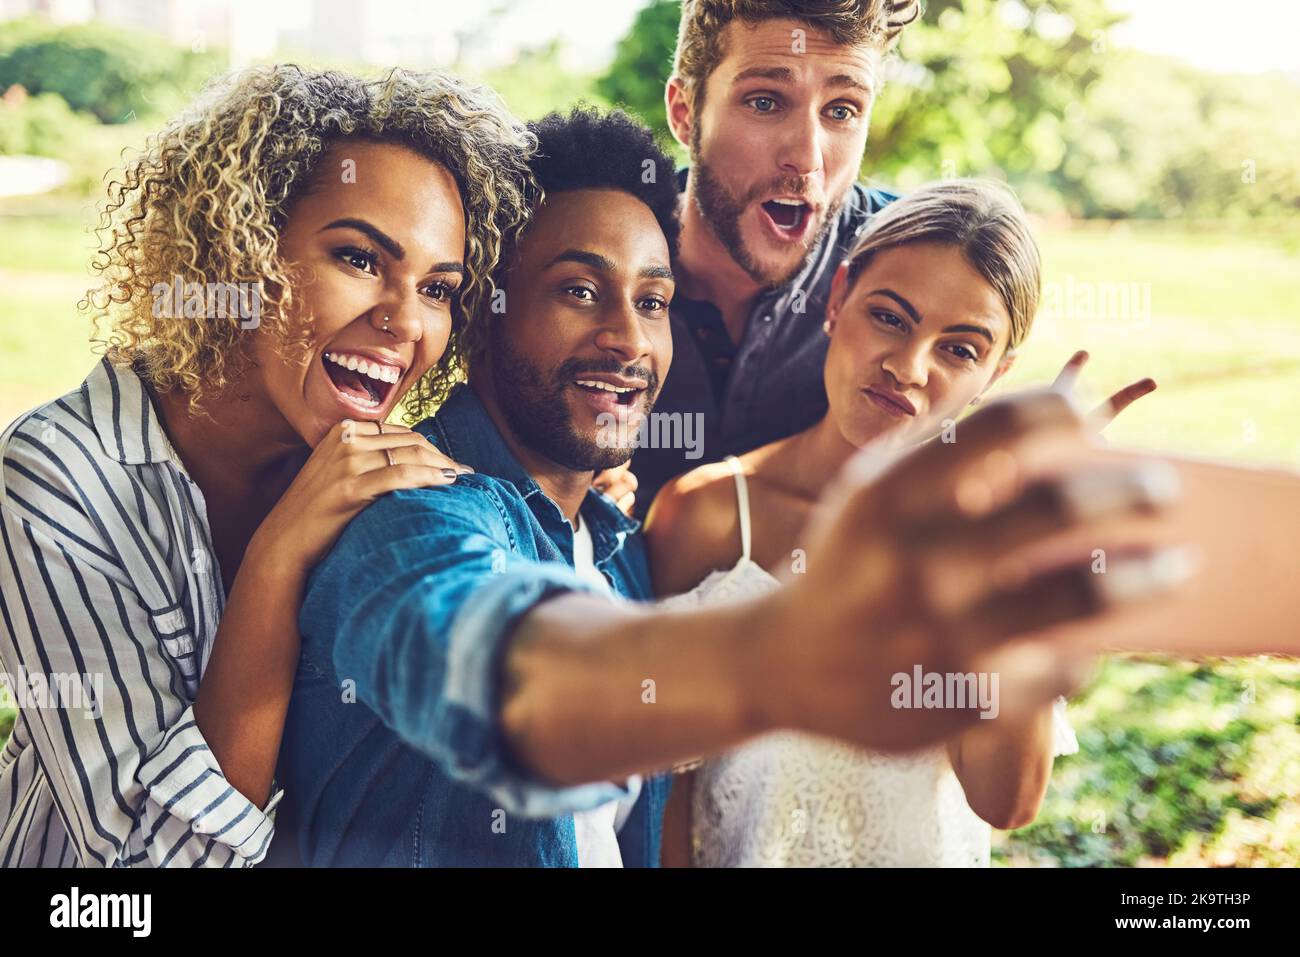 This pic will get all the likes. two happy young couples taking a selfie together outdoors. Stock Photo